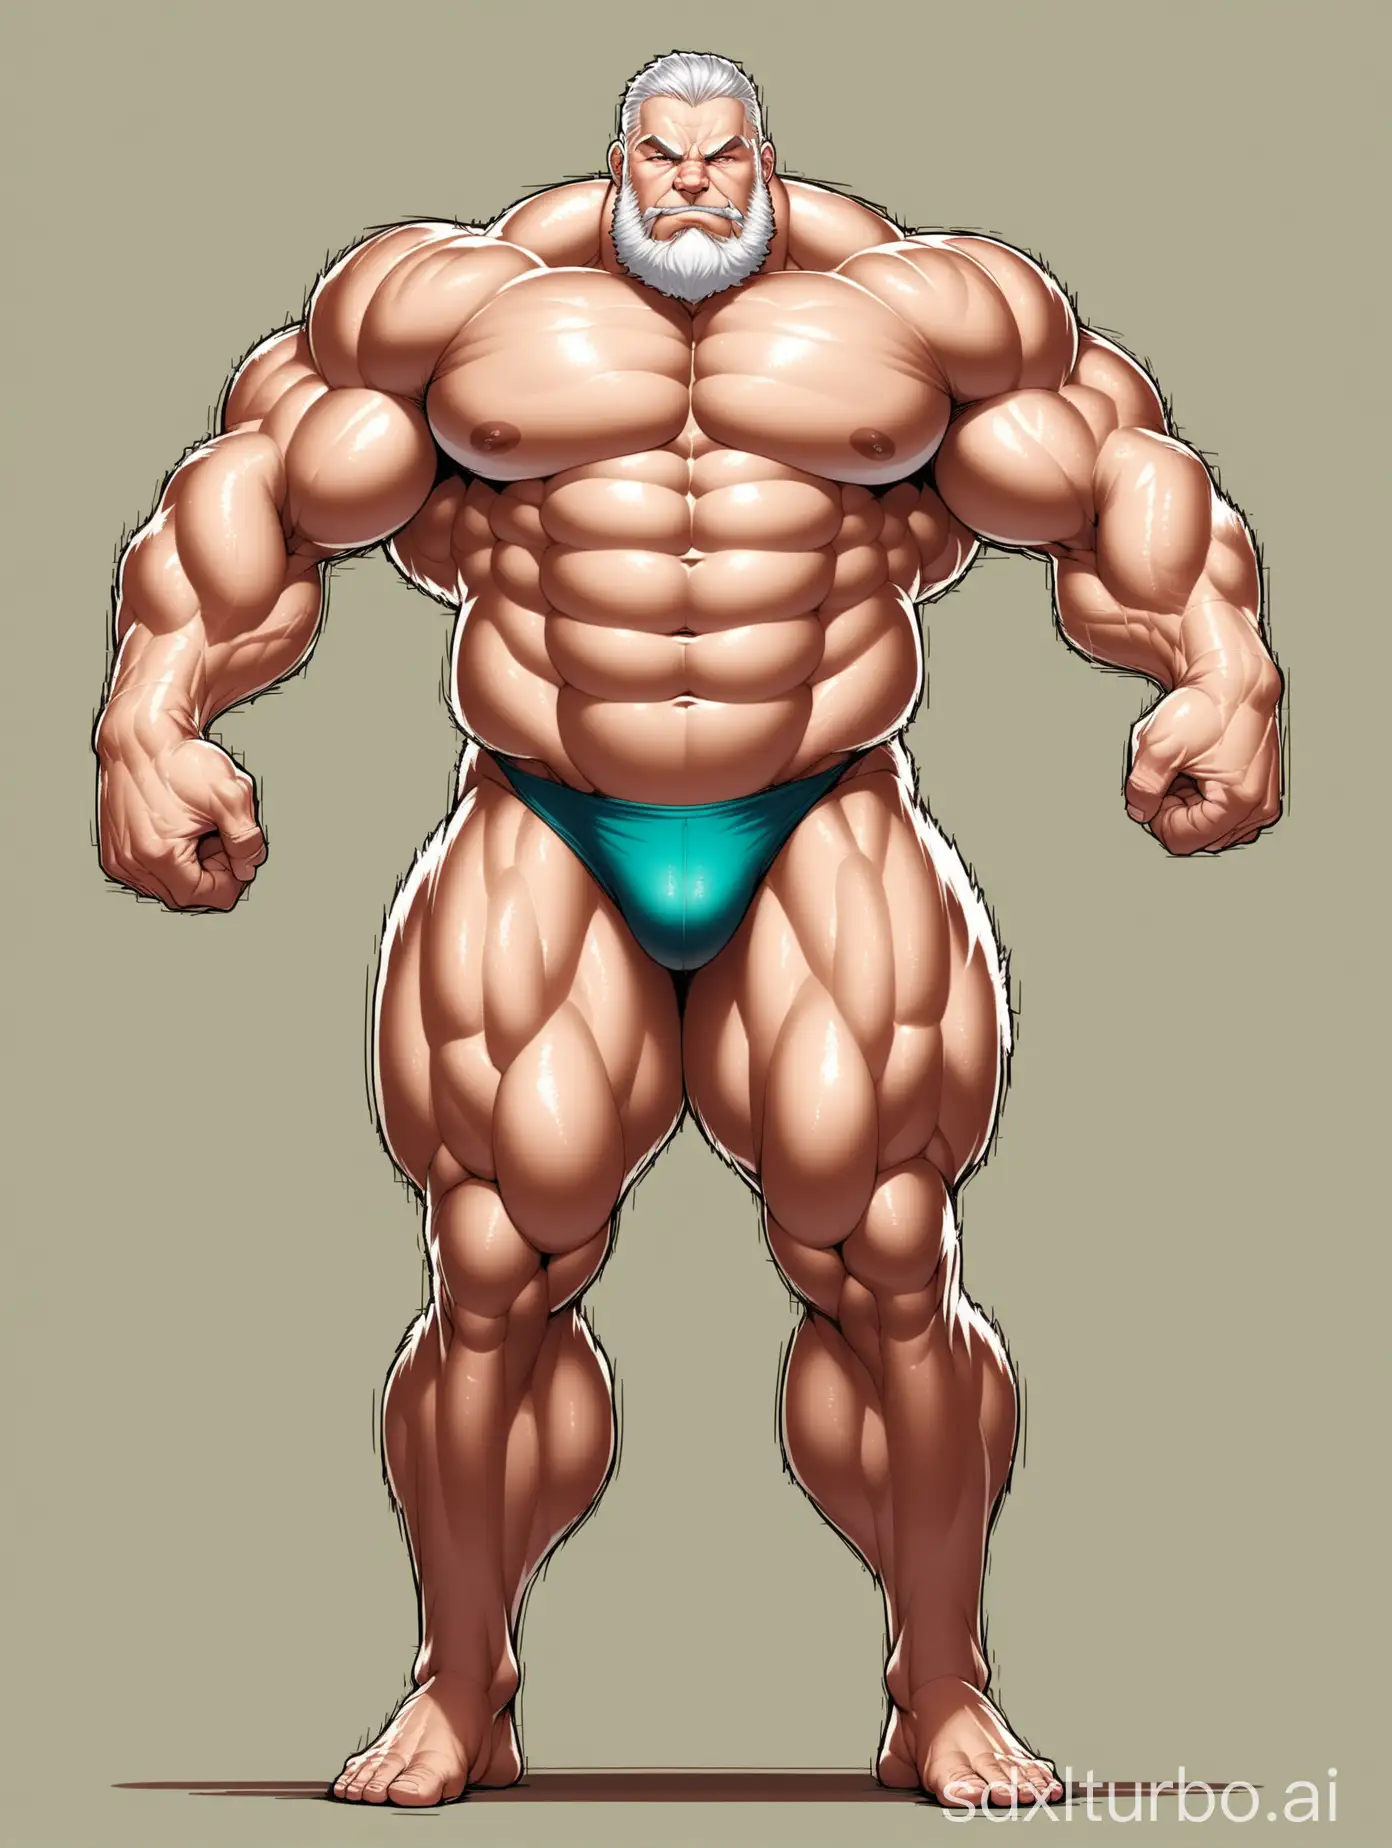 White skin and massive muscle stud, much bodyhair. Huge and giant and Strong body. Very Long and strong legs. 2m tall. very Big Chest. very Big biceps. 8-pack abs. Very Massive muscle Body. Wearing underwear. he is giant tall. very fat. very fat. very fat. Full Body diagram. very long strong legs.very long legs.very long legs. raise his arms to show his huge biceps. raise his arms to show his huge biceps.very old man.very handsome men.